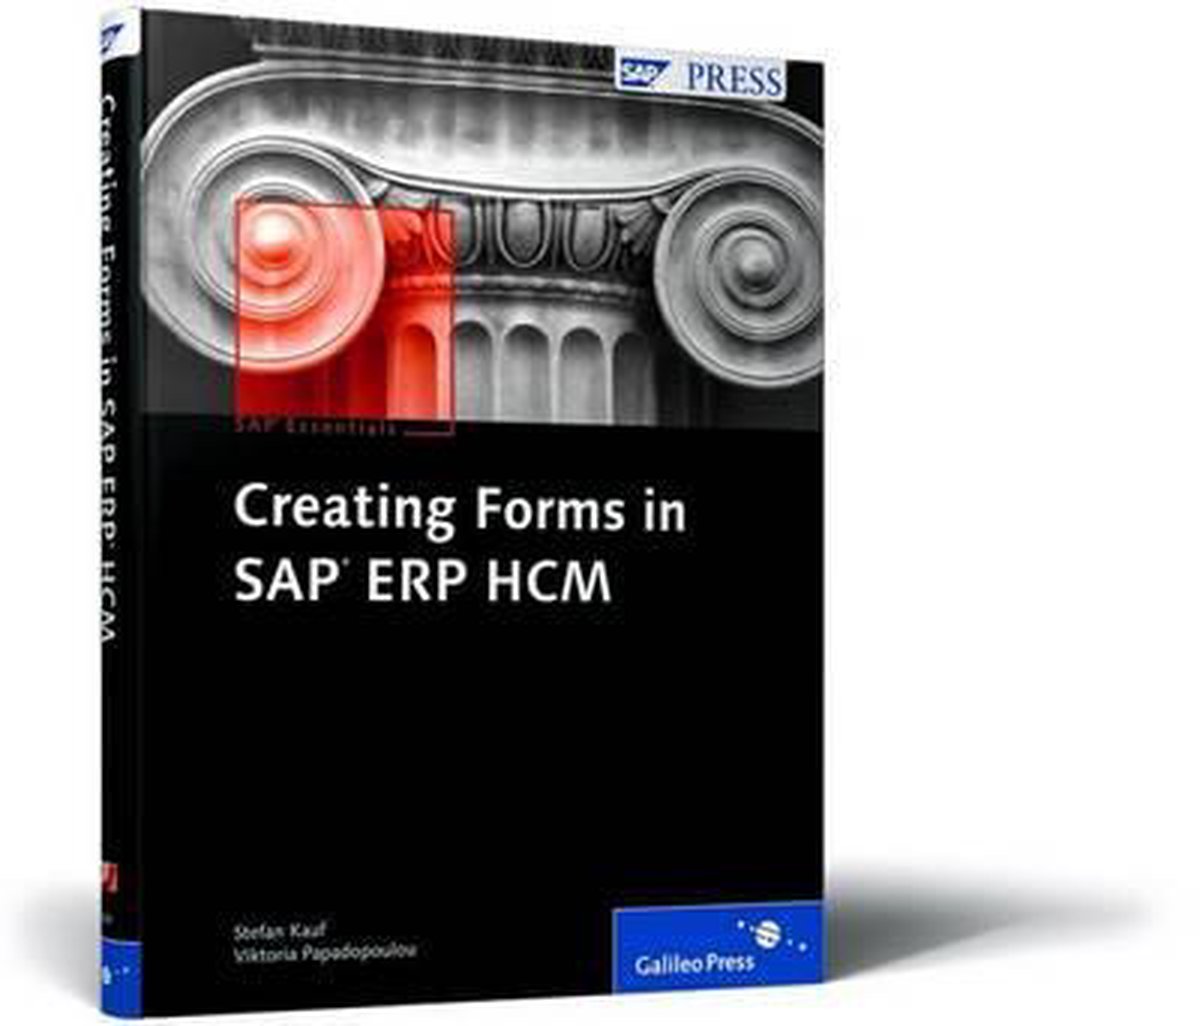 Creating Forms in SAP ERP HCM